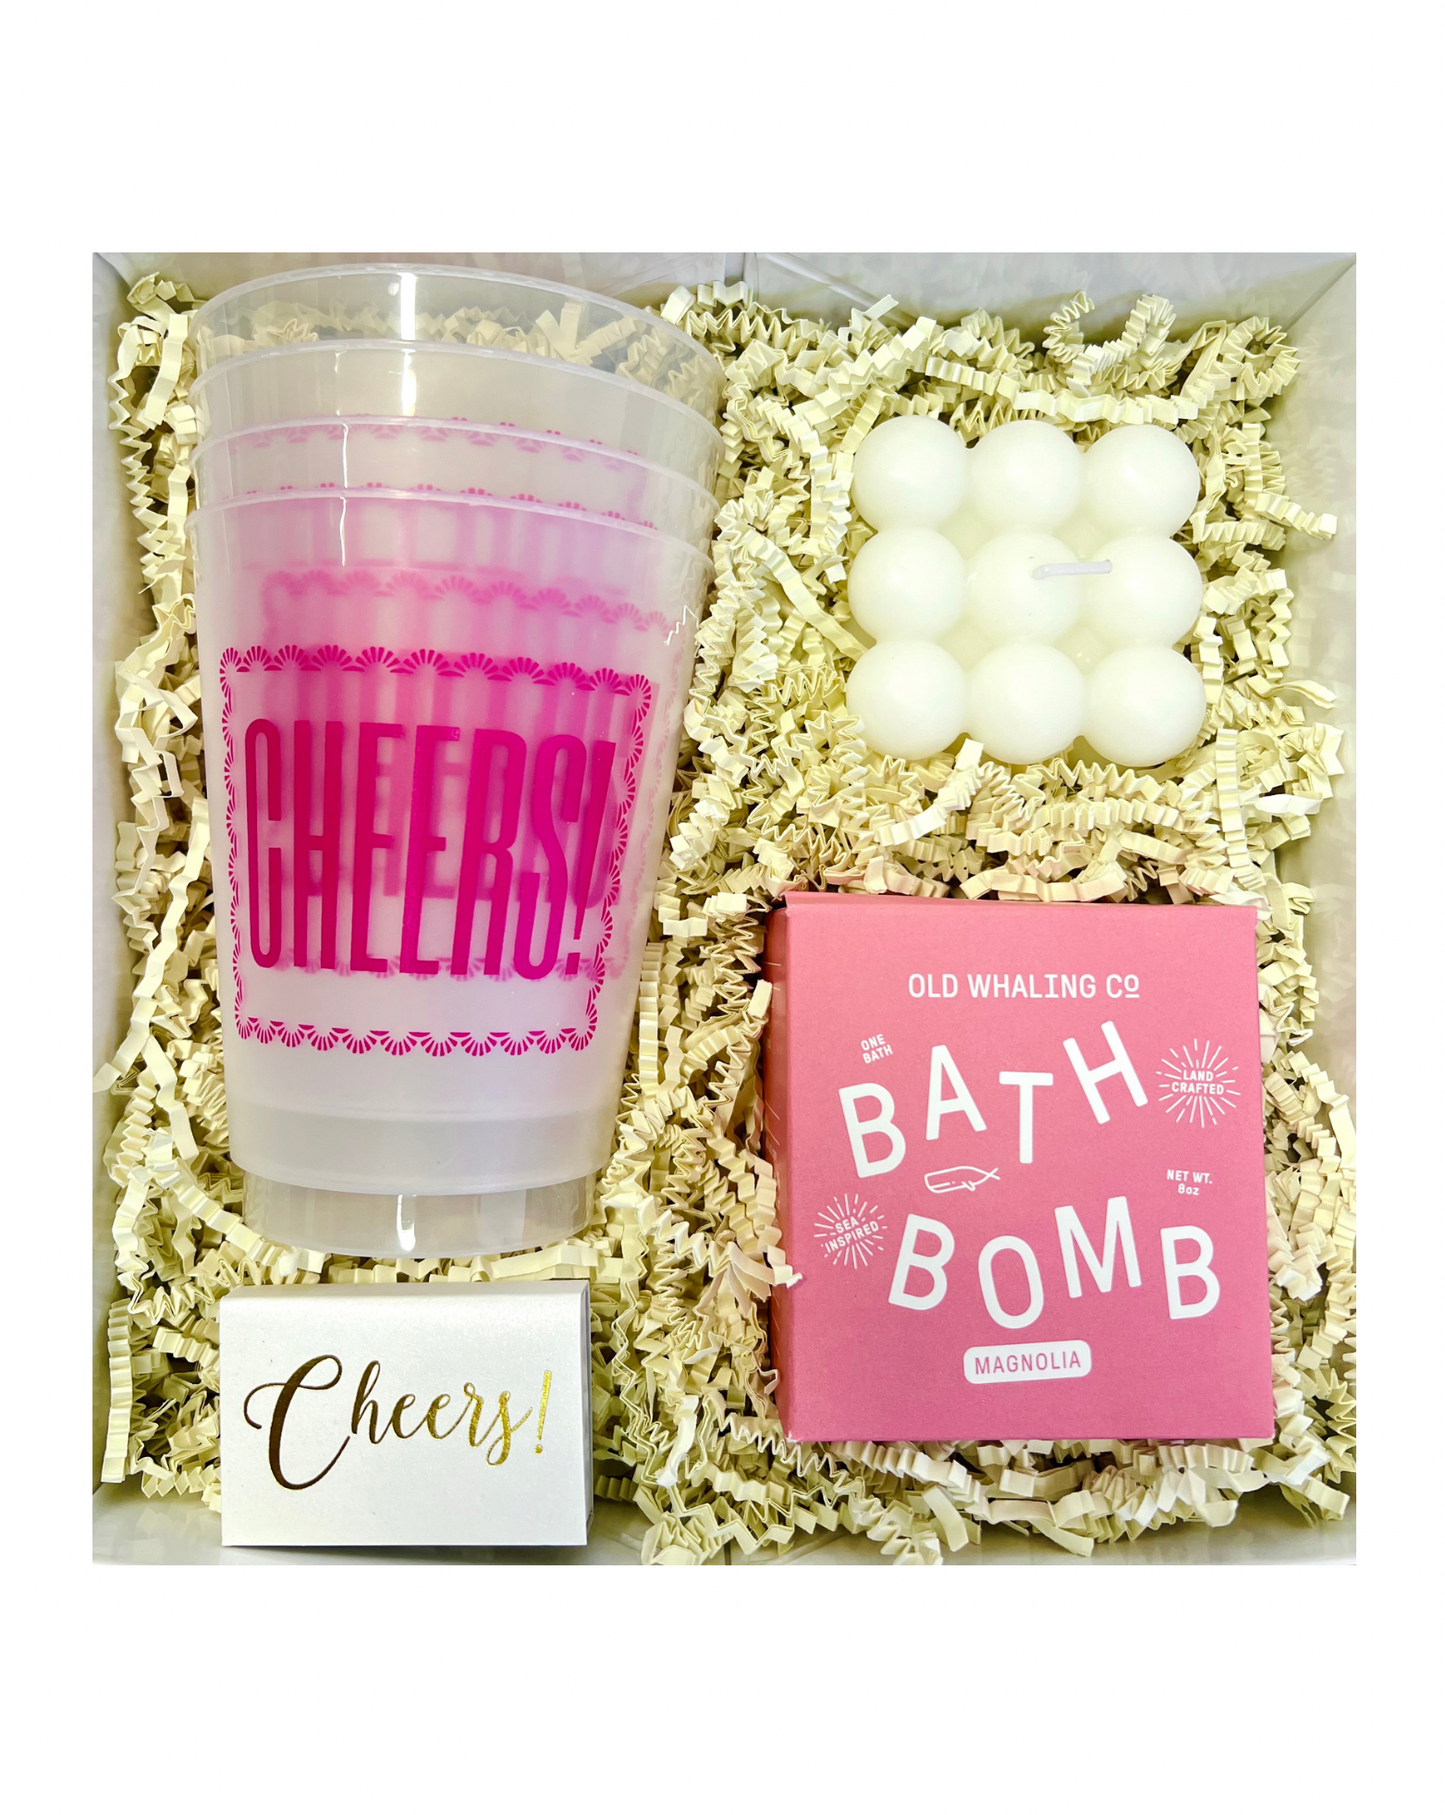 The Pink Cheers Gift Box